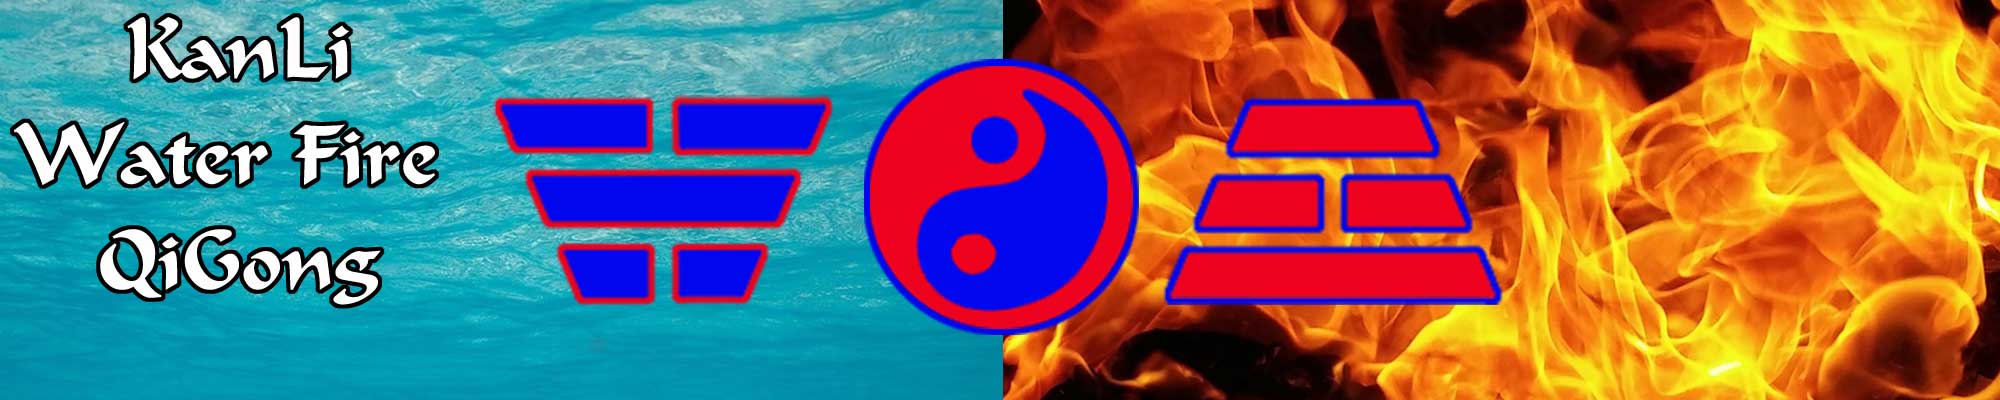 Water and Fire picture - KanLi Water Fire QI GONG Online Energy course for Health Wellness Consciousness Expansion